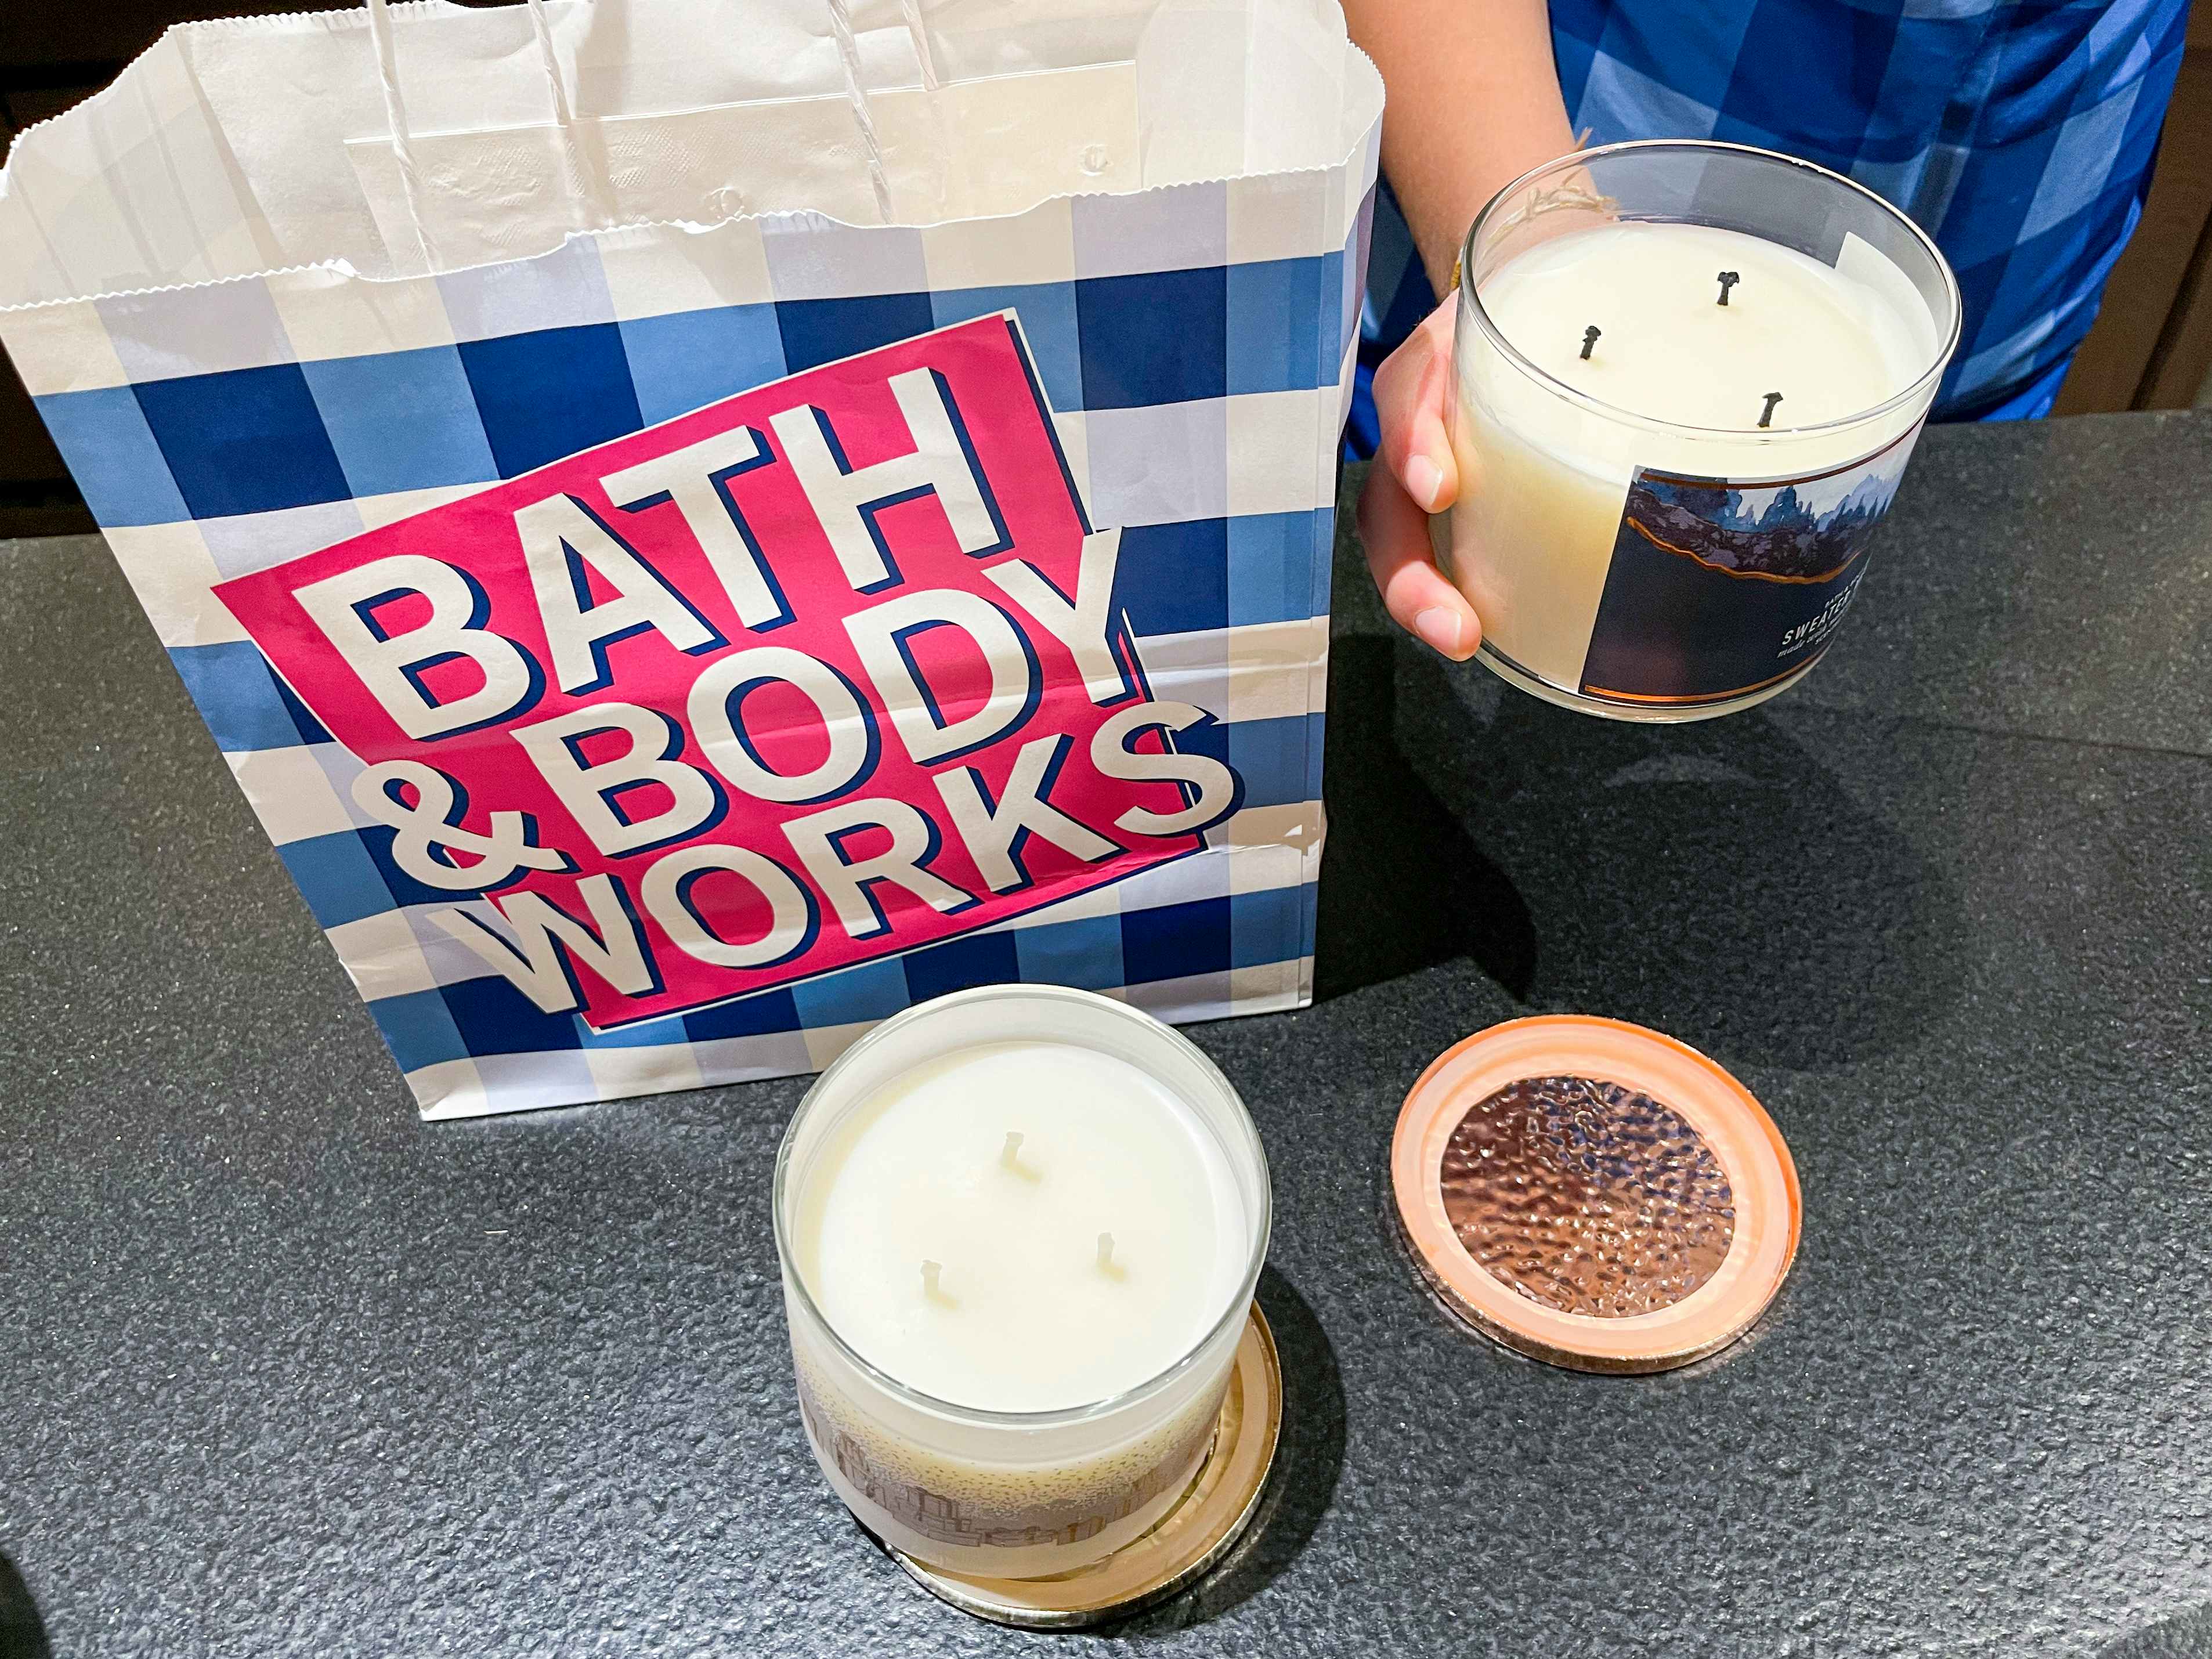 A person holding a 3-wick candle that has been lit before next to a Bath & Body Works bag and an unused 3-wick candle.